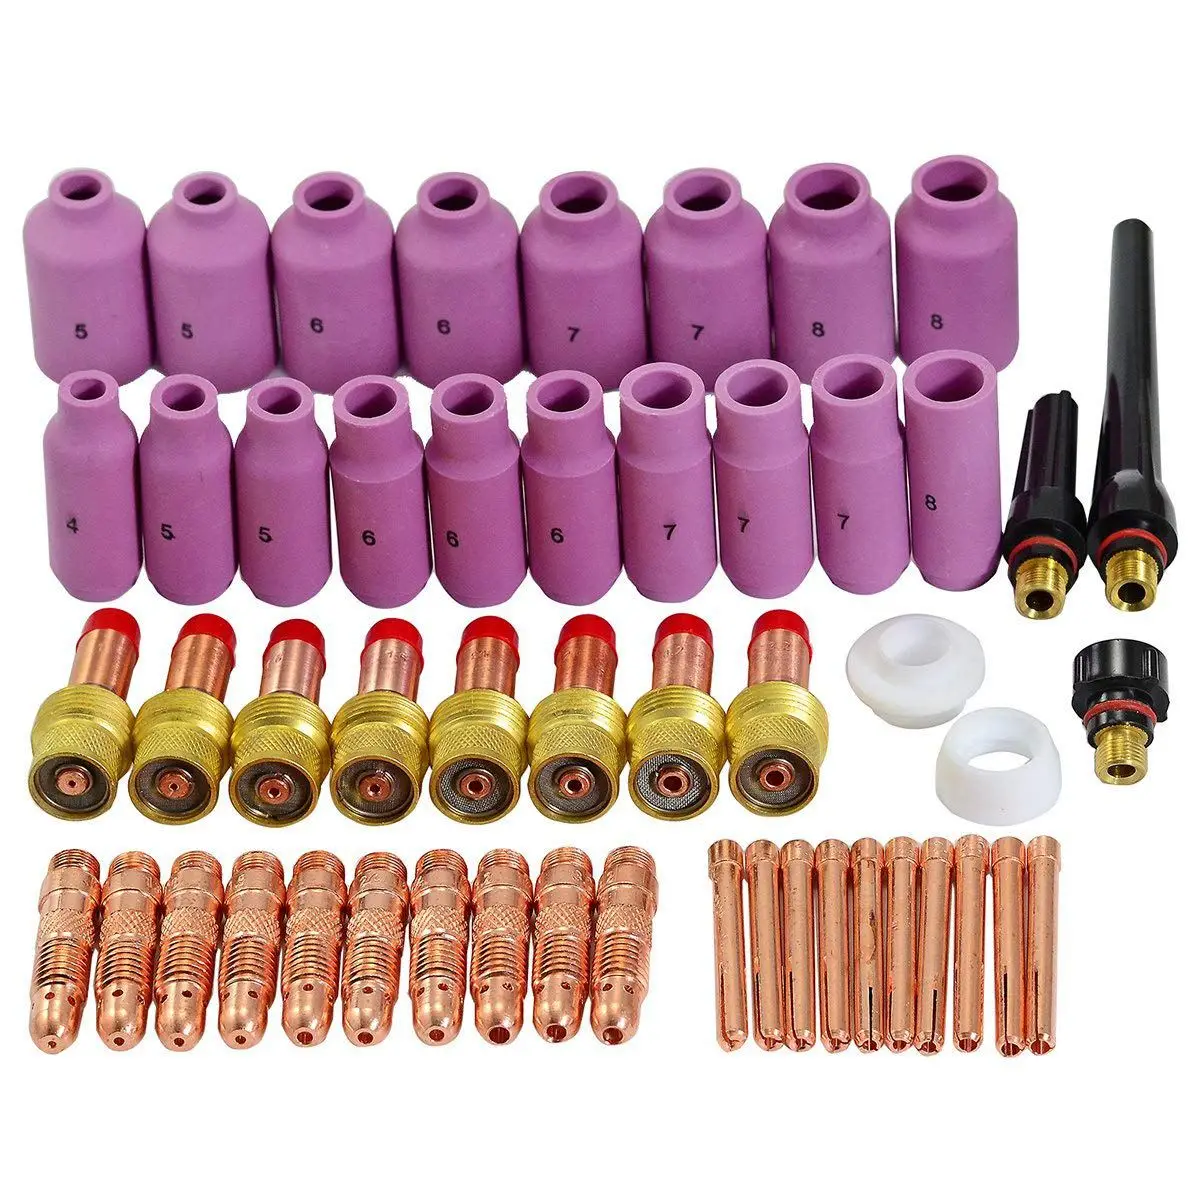 TIG Gas Lens Collet Body Consumables Kit Fit WP 17 18 26 TIG Welding Torch 51pcs